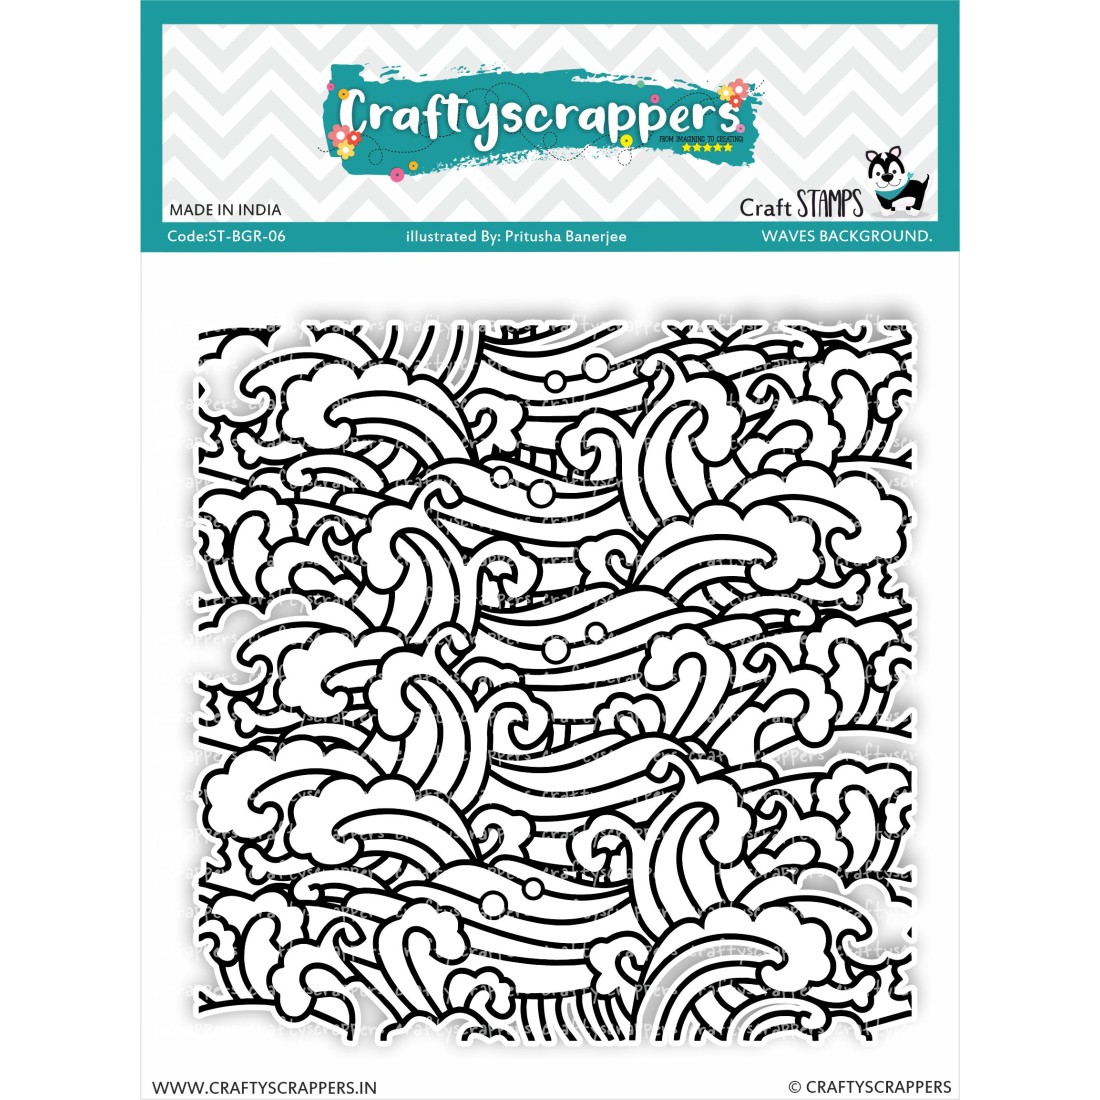 Craftyscrappers Stamps- WAVES BACKGROUND